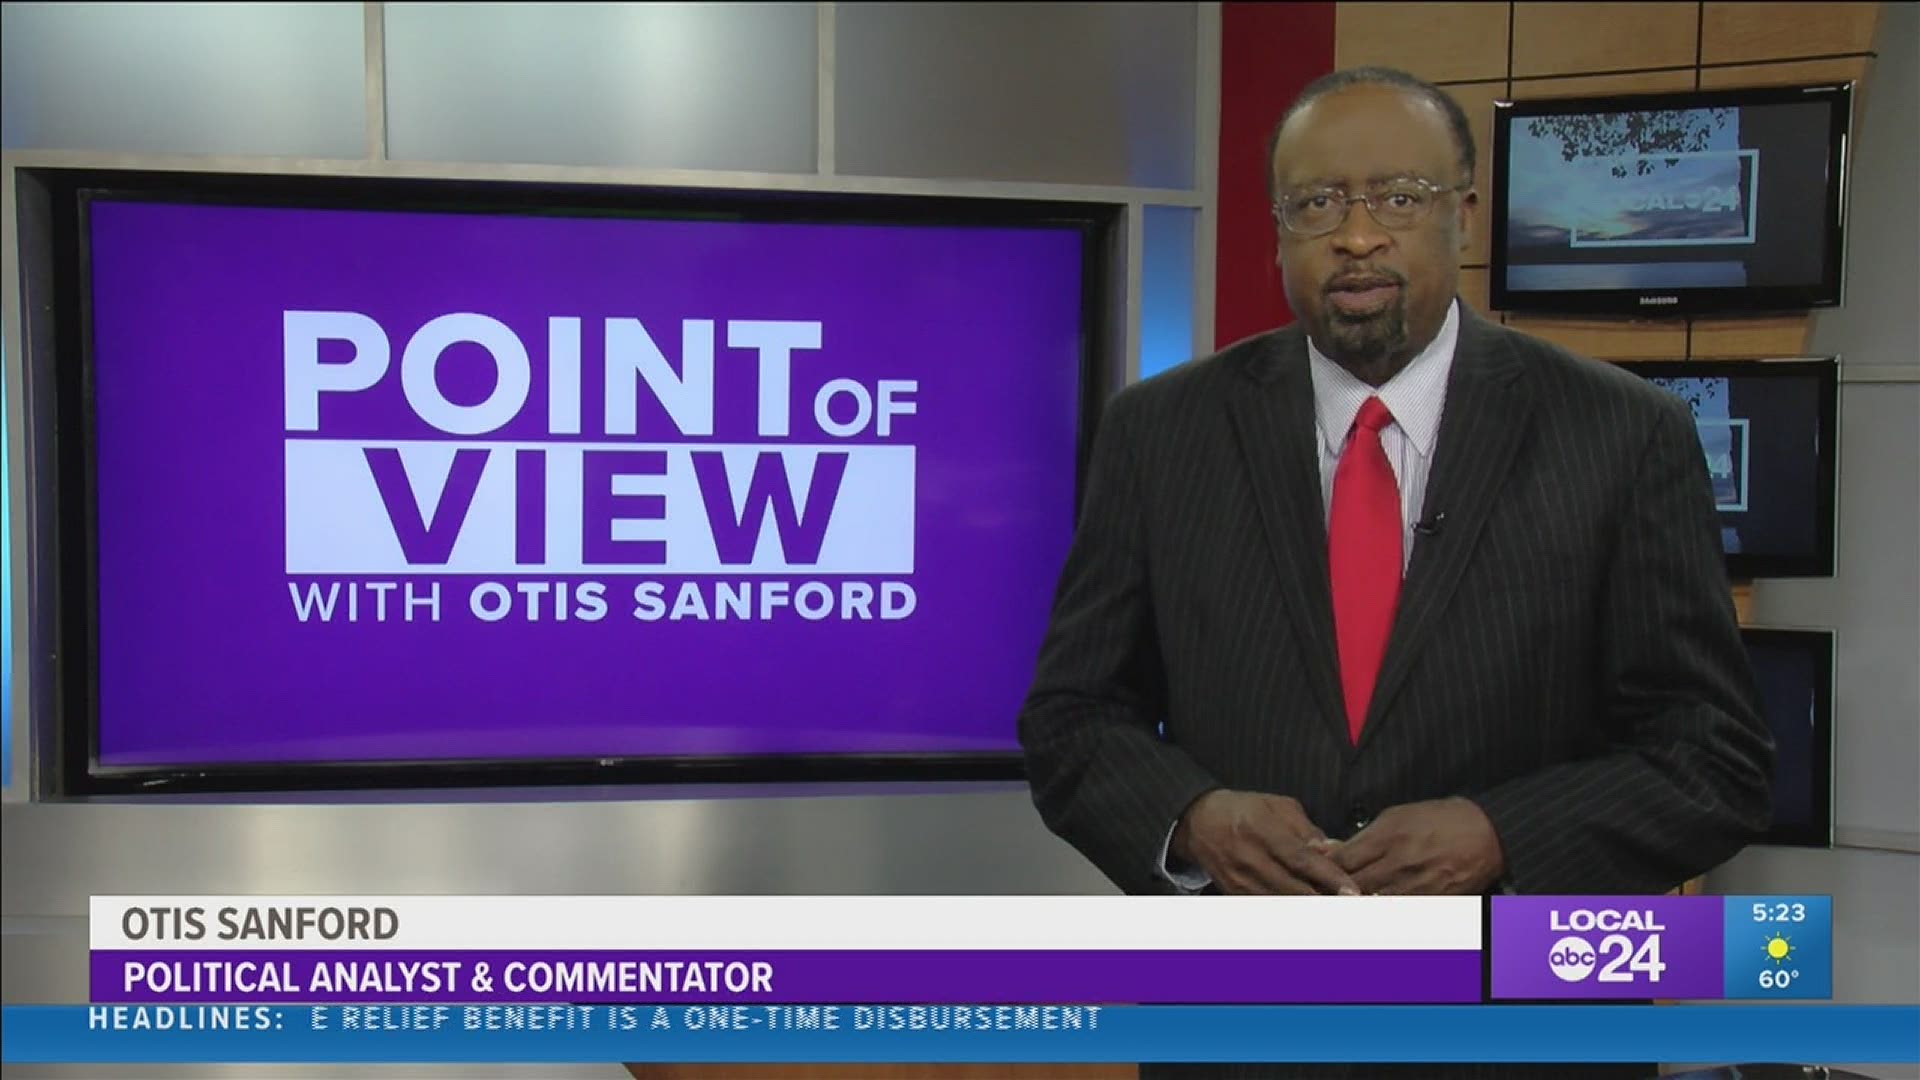 Local 24 News political analyst and commentator Otis Sanford shares his point of view on Mississippi Gov. Tate Reeves dropping the mask mandate.